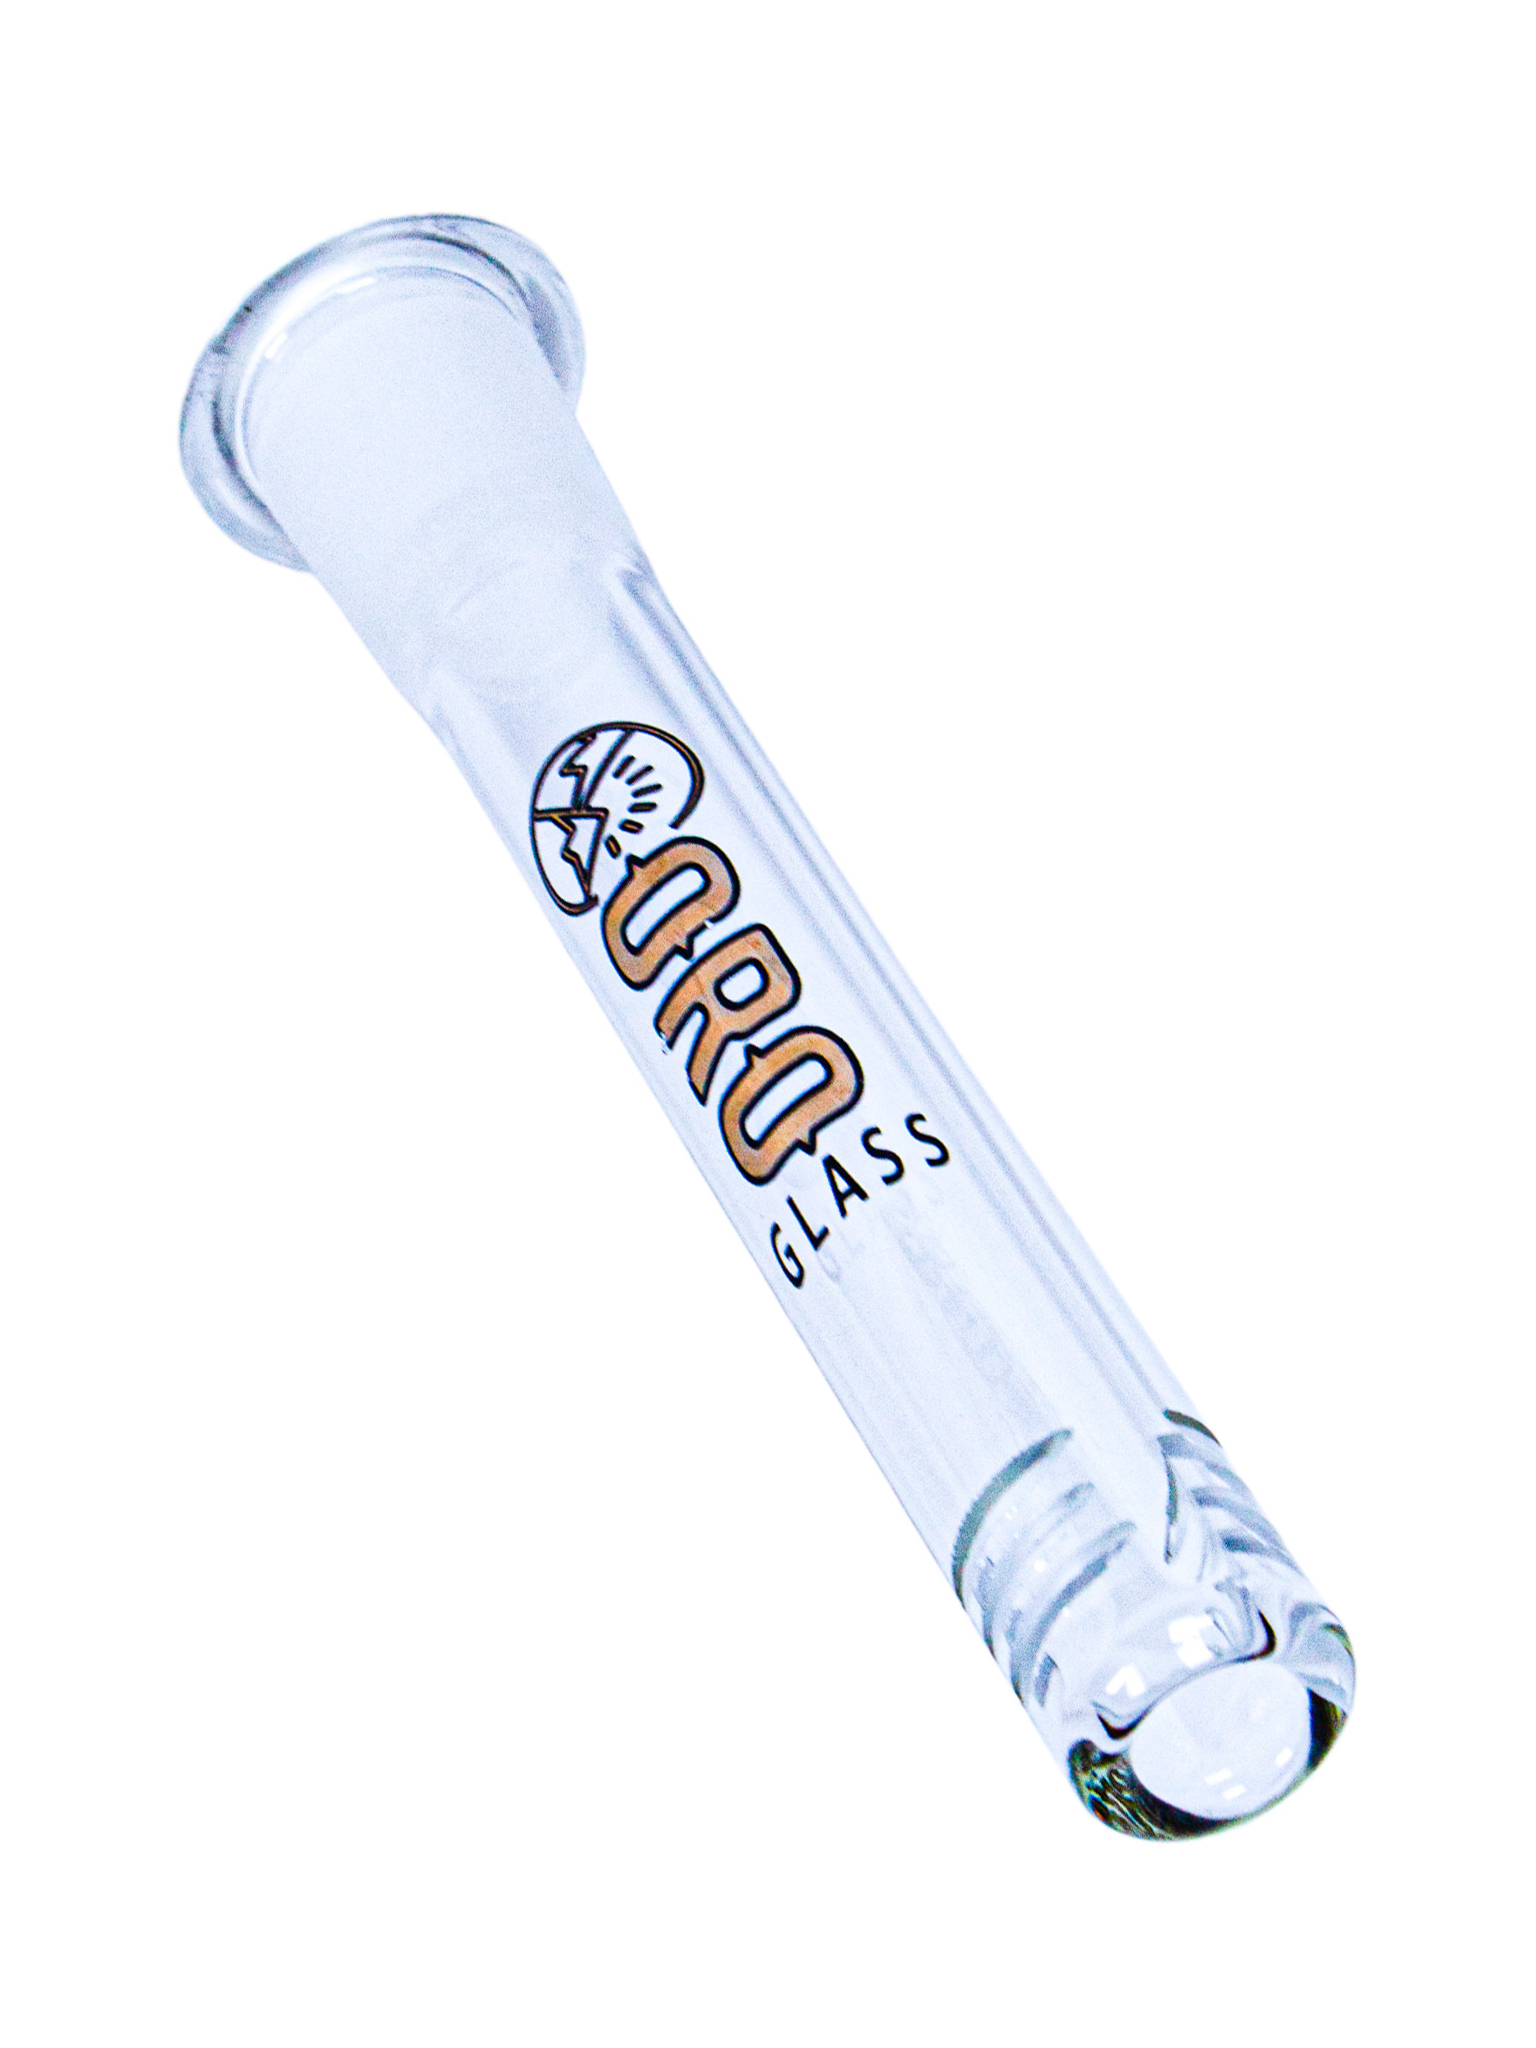 An Oro Glass Company 3.5-inch 18mm to 14mm Diffused Downstem.